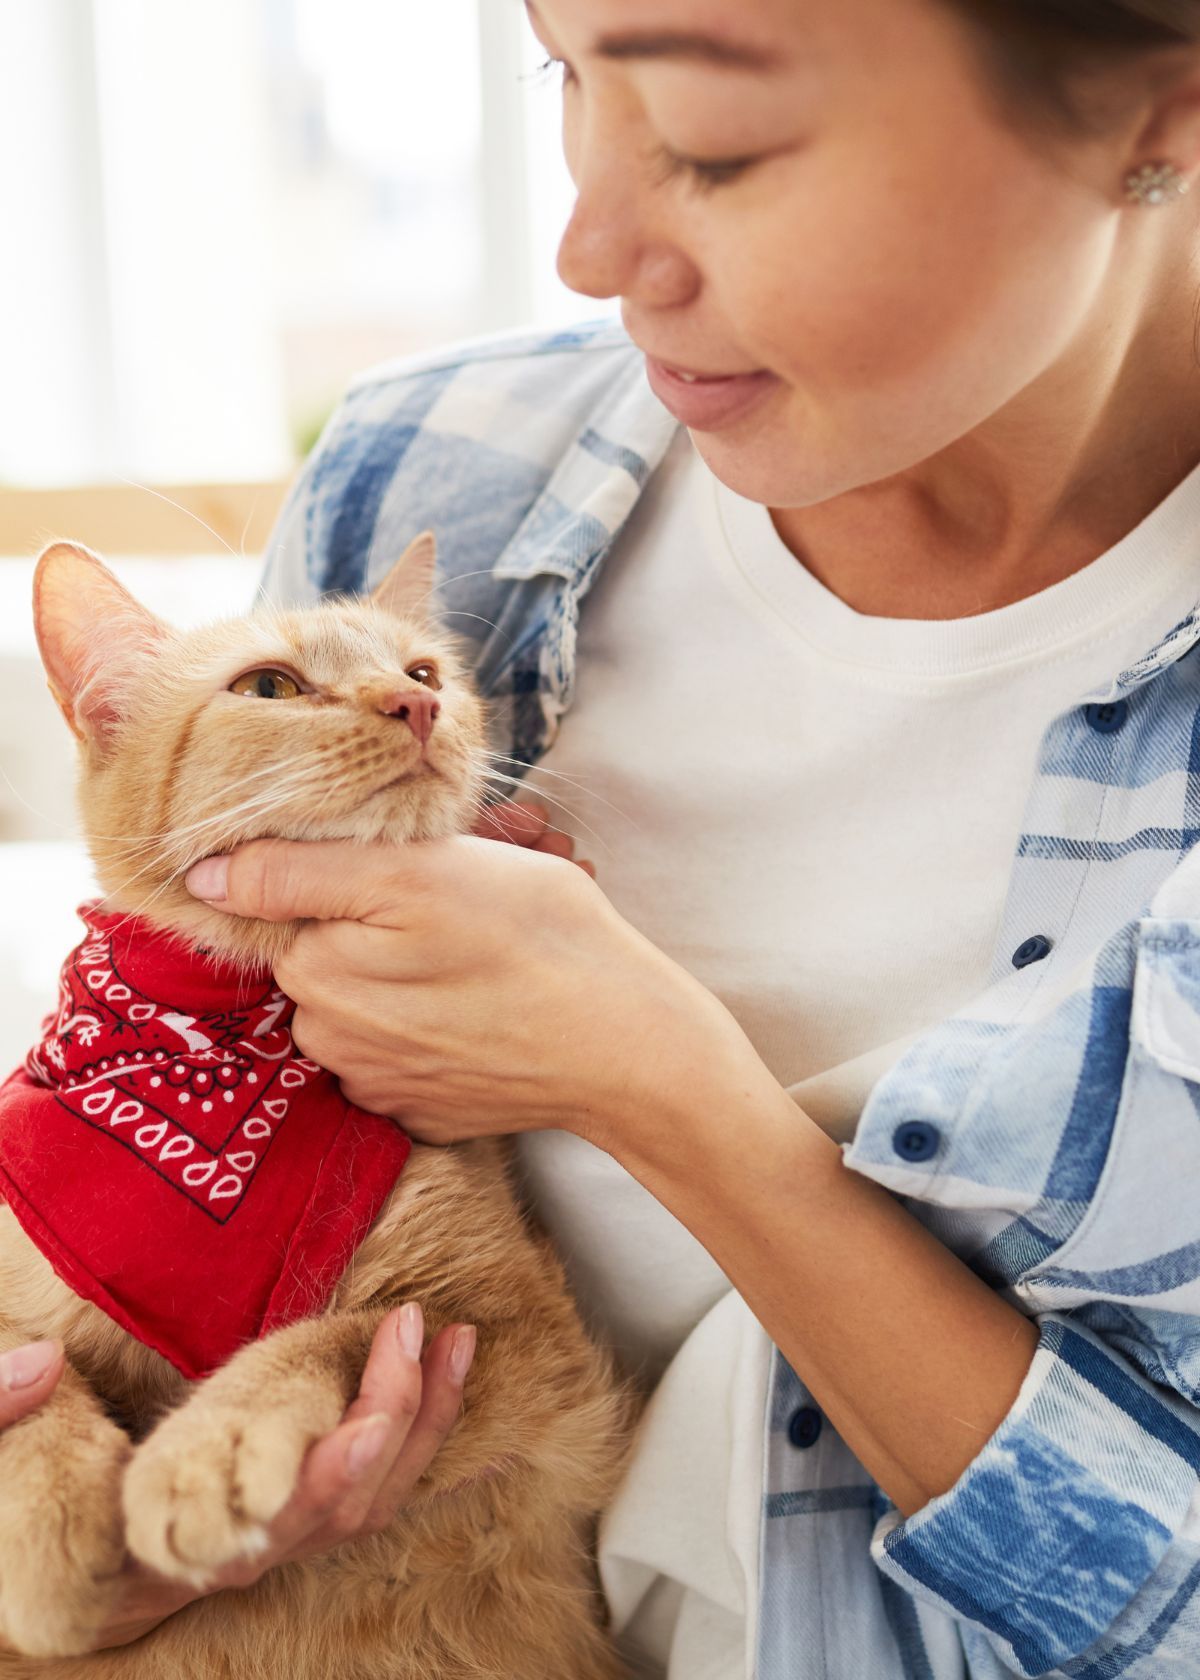 The Purr-fect Accessory for Your Cat: A Bandana Collar!